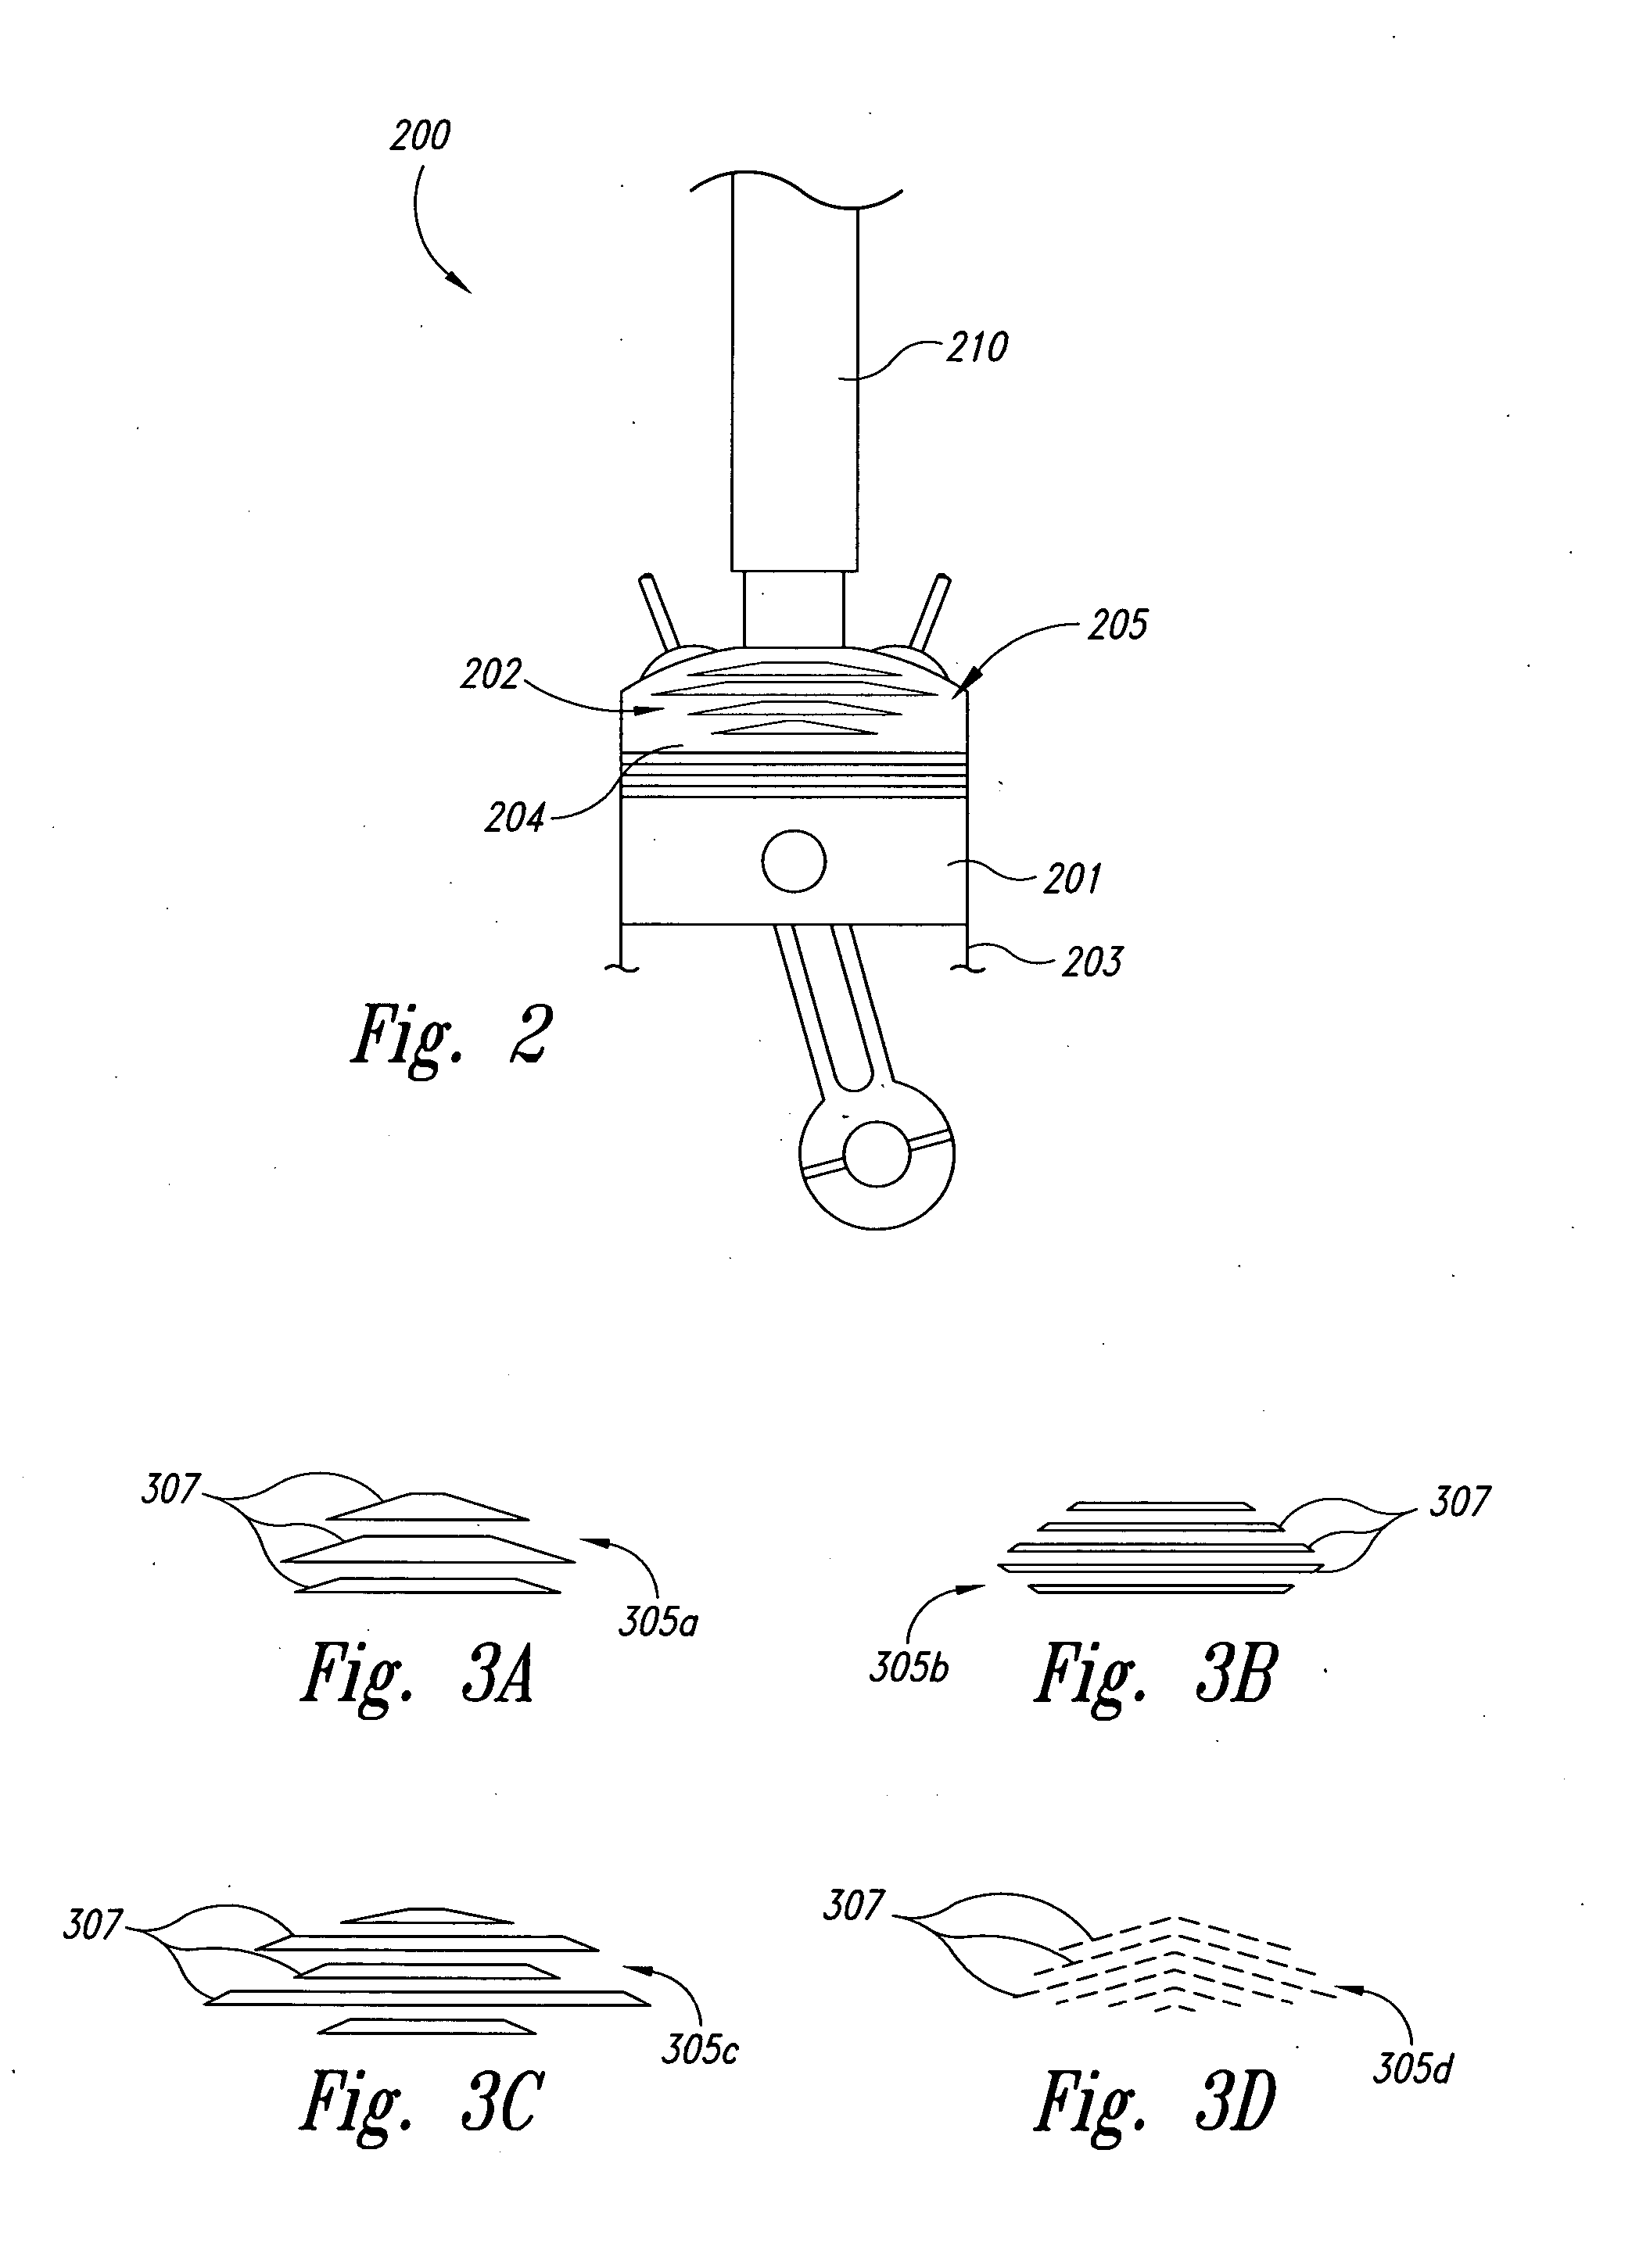 Methods and systems for reducing the formation of oxides of nitrogen during combustion in engines